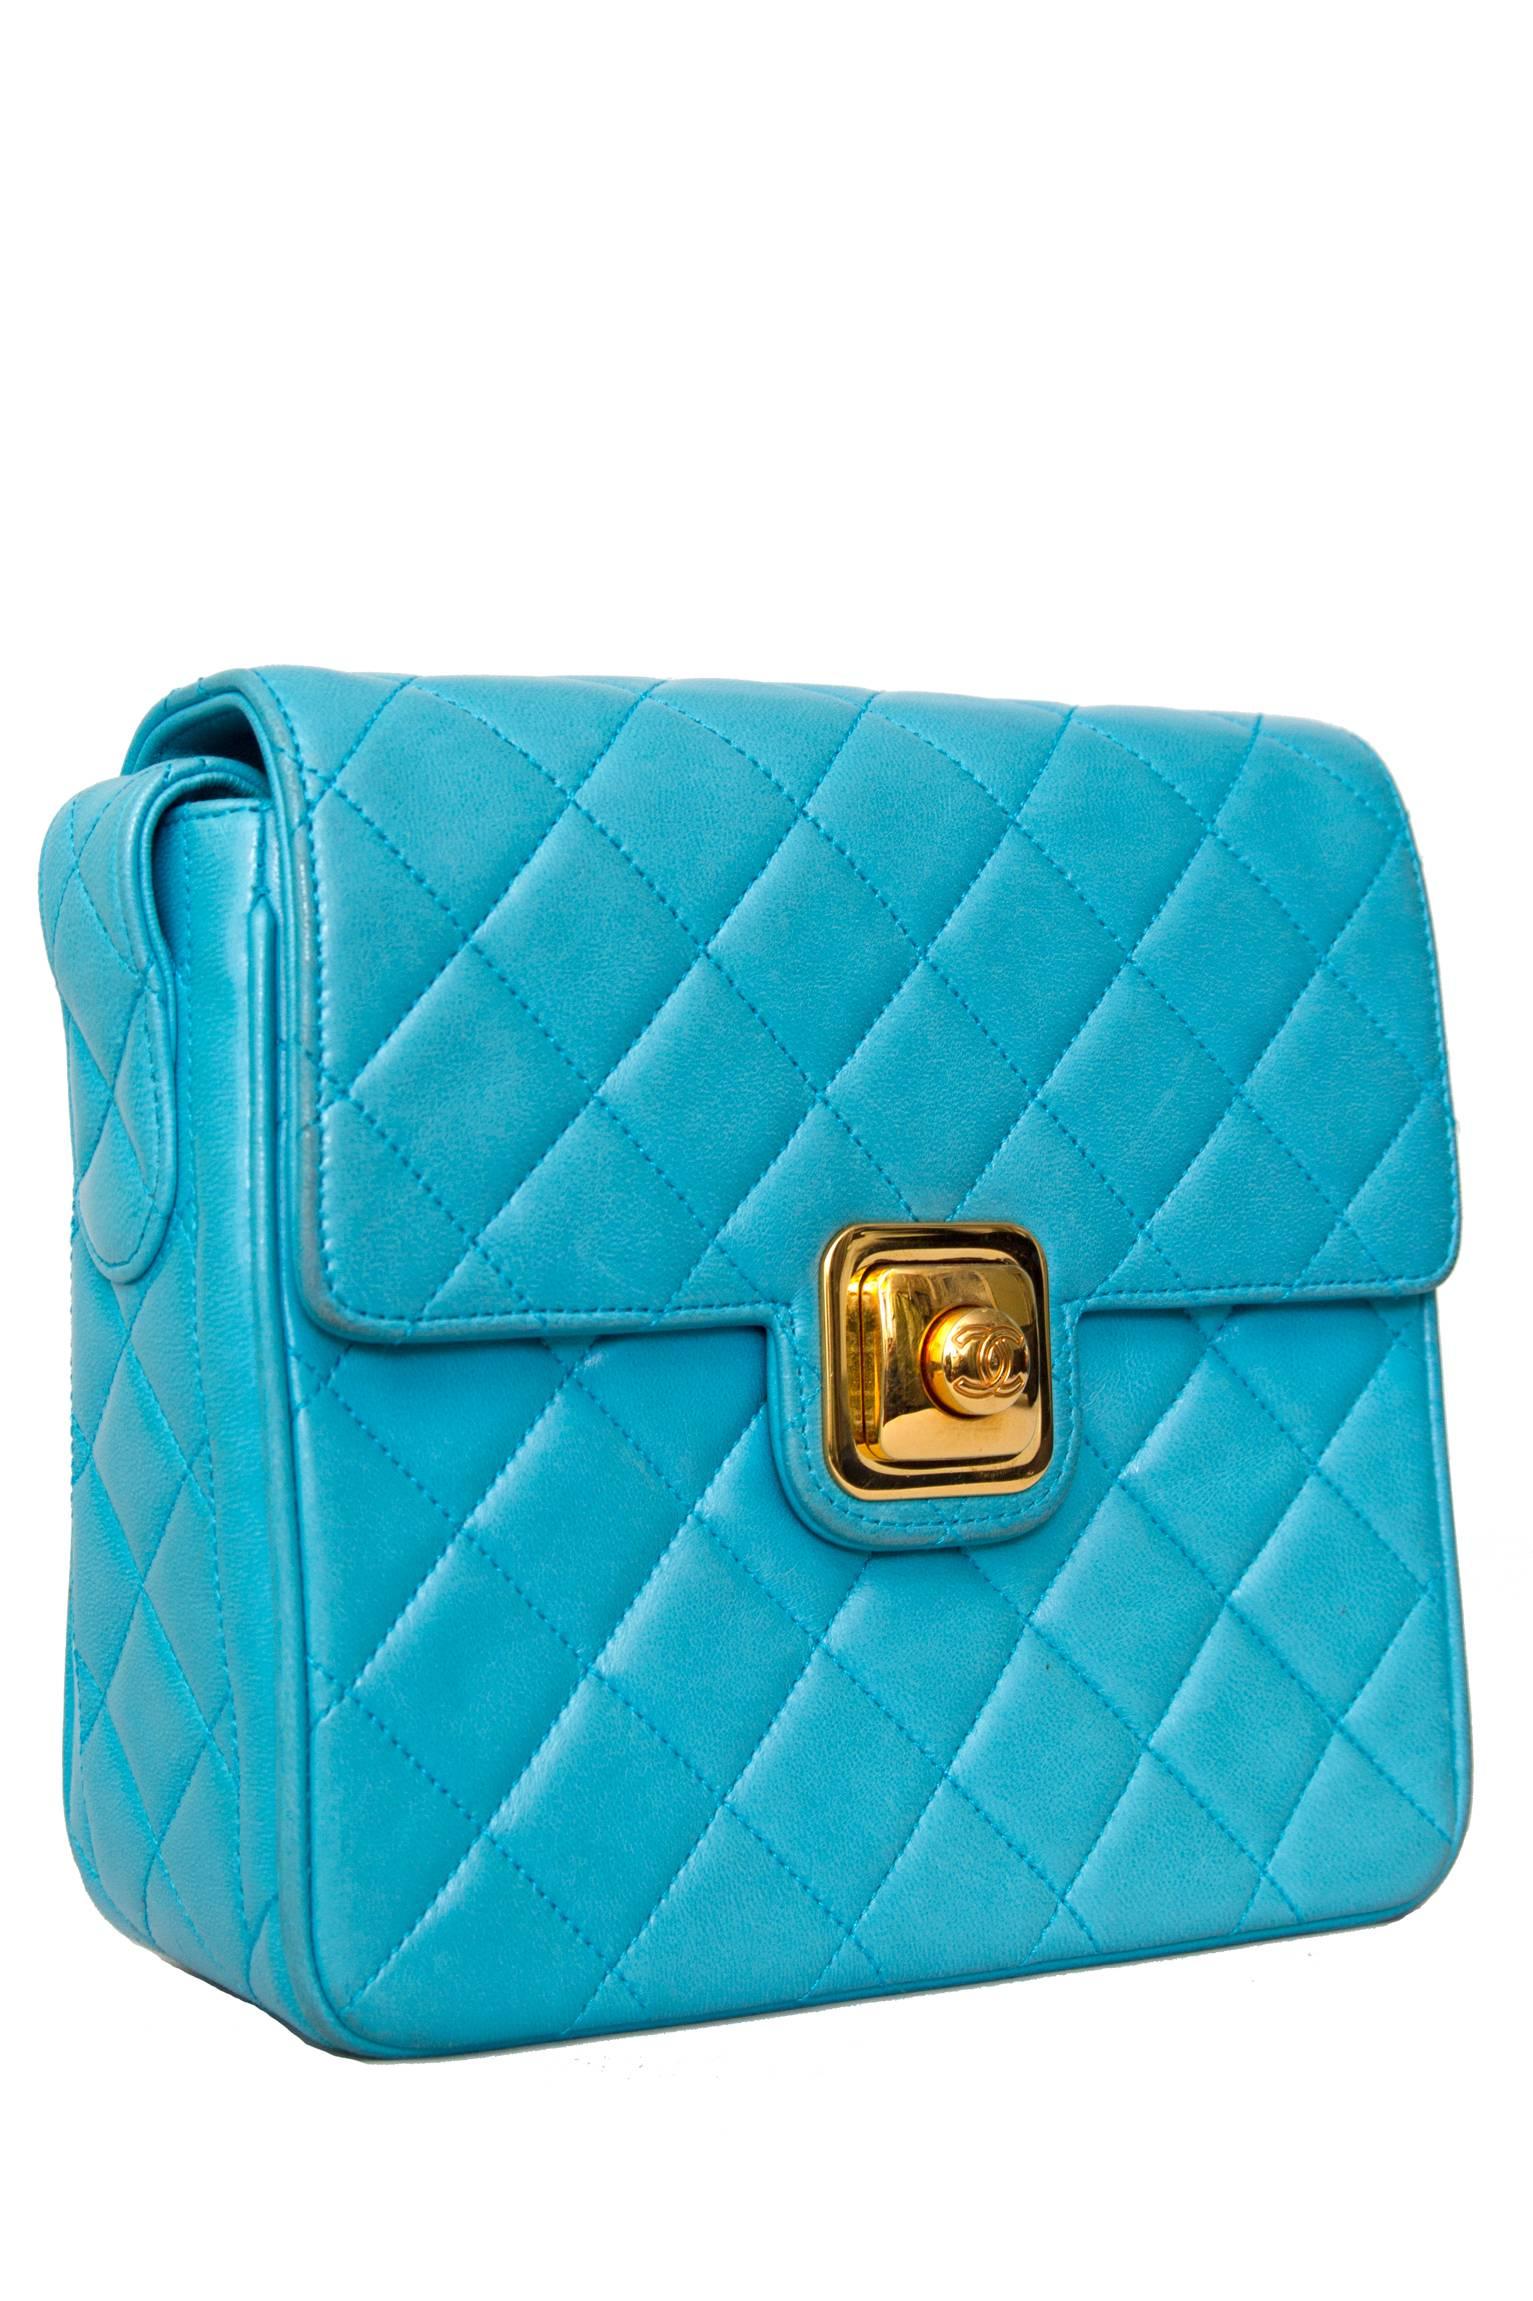 A boxy 90s bright turquoise quilted Chanel leather shoulder bag with gold hardware. 
The bag has one large inner compartment with a smaller side pocket with a zipper closure and a small open top pocket on the outer back of the bag. 
In the front,